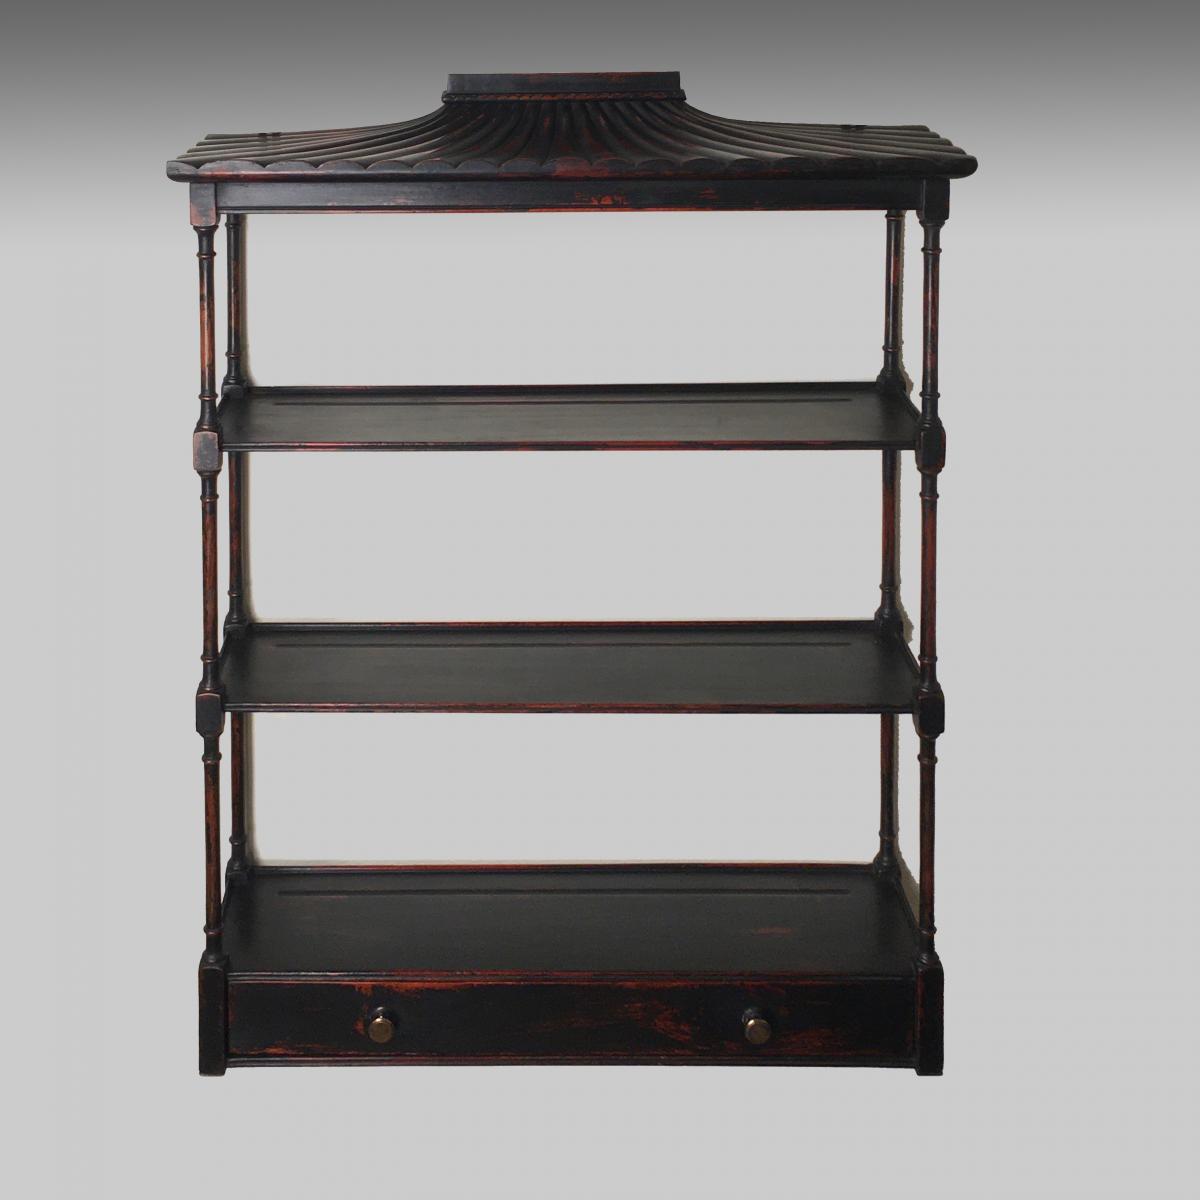 Chinese antique pagoda topped display shelves